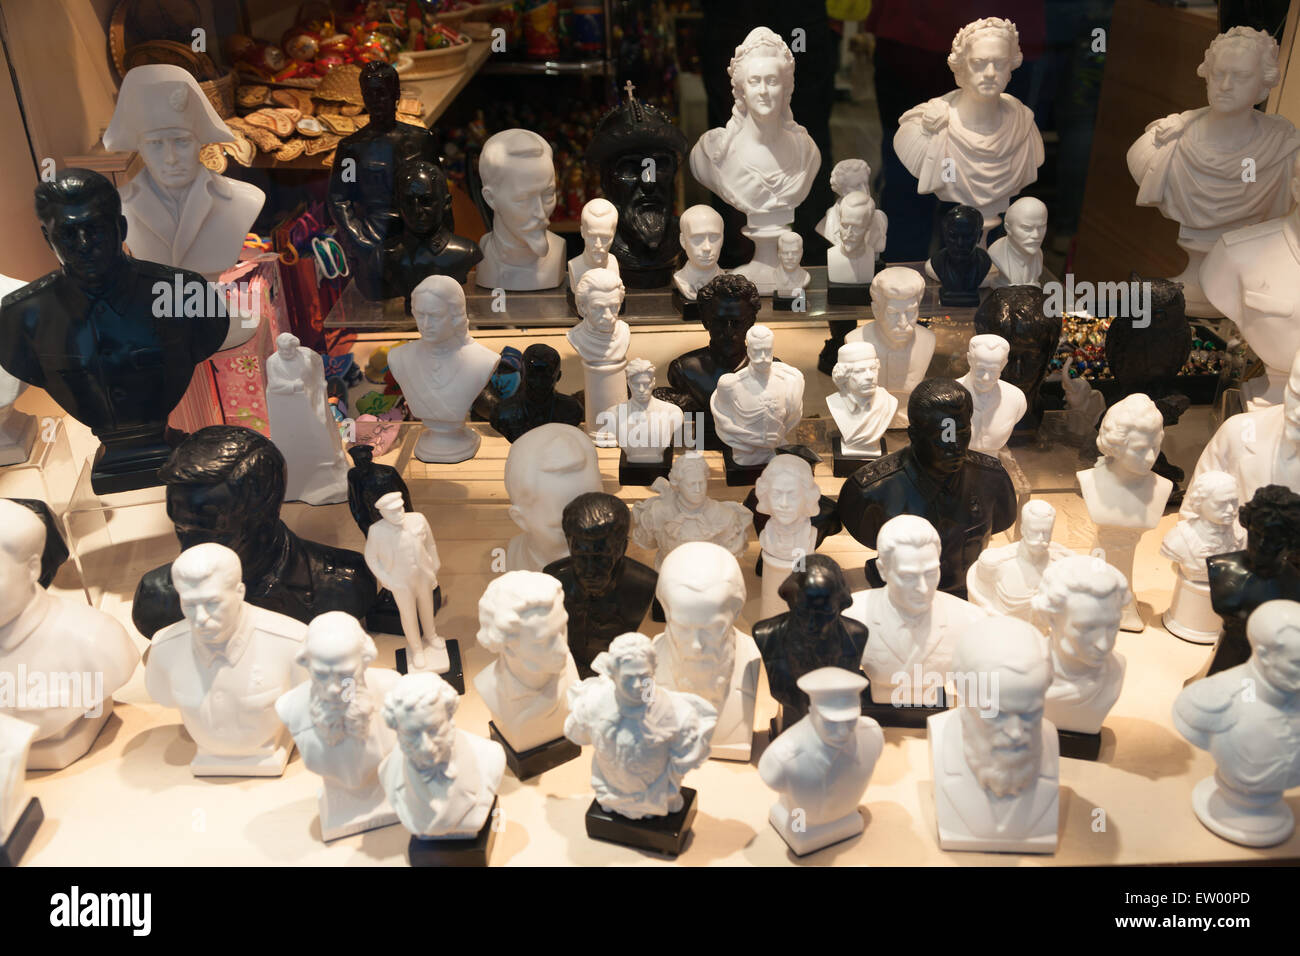 Busts of various famous historical figures in a shop window Stock Photo